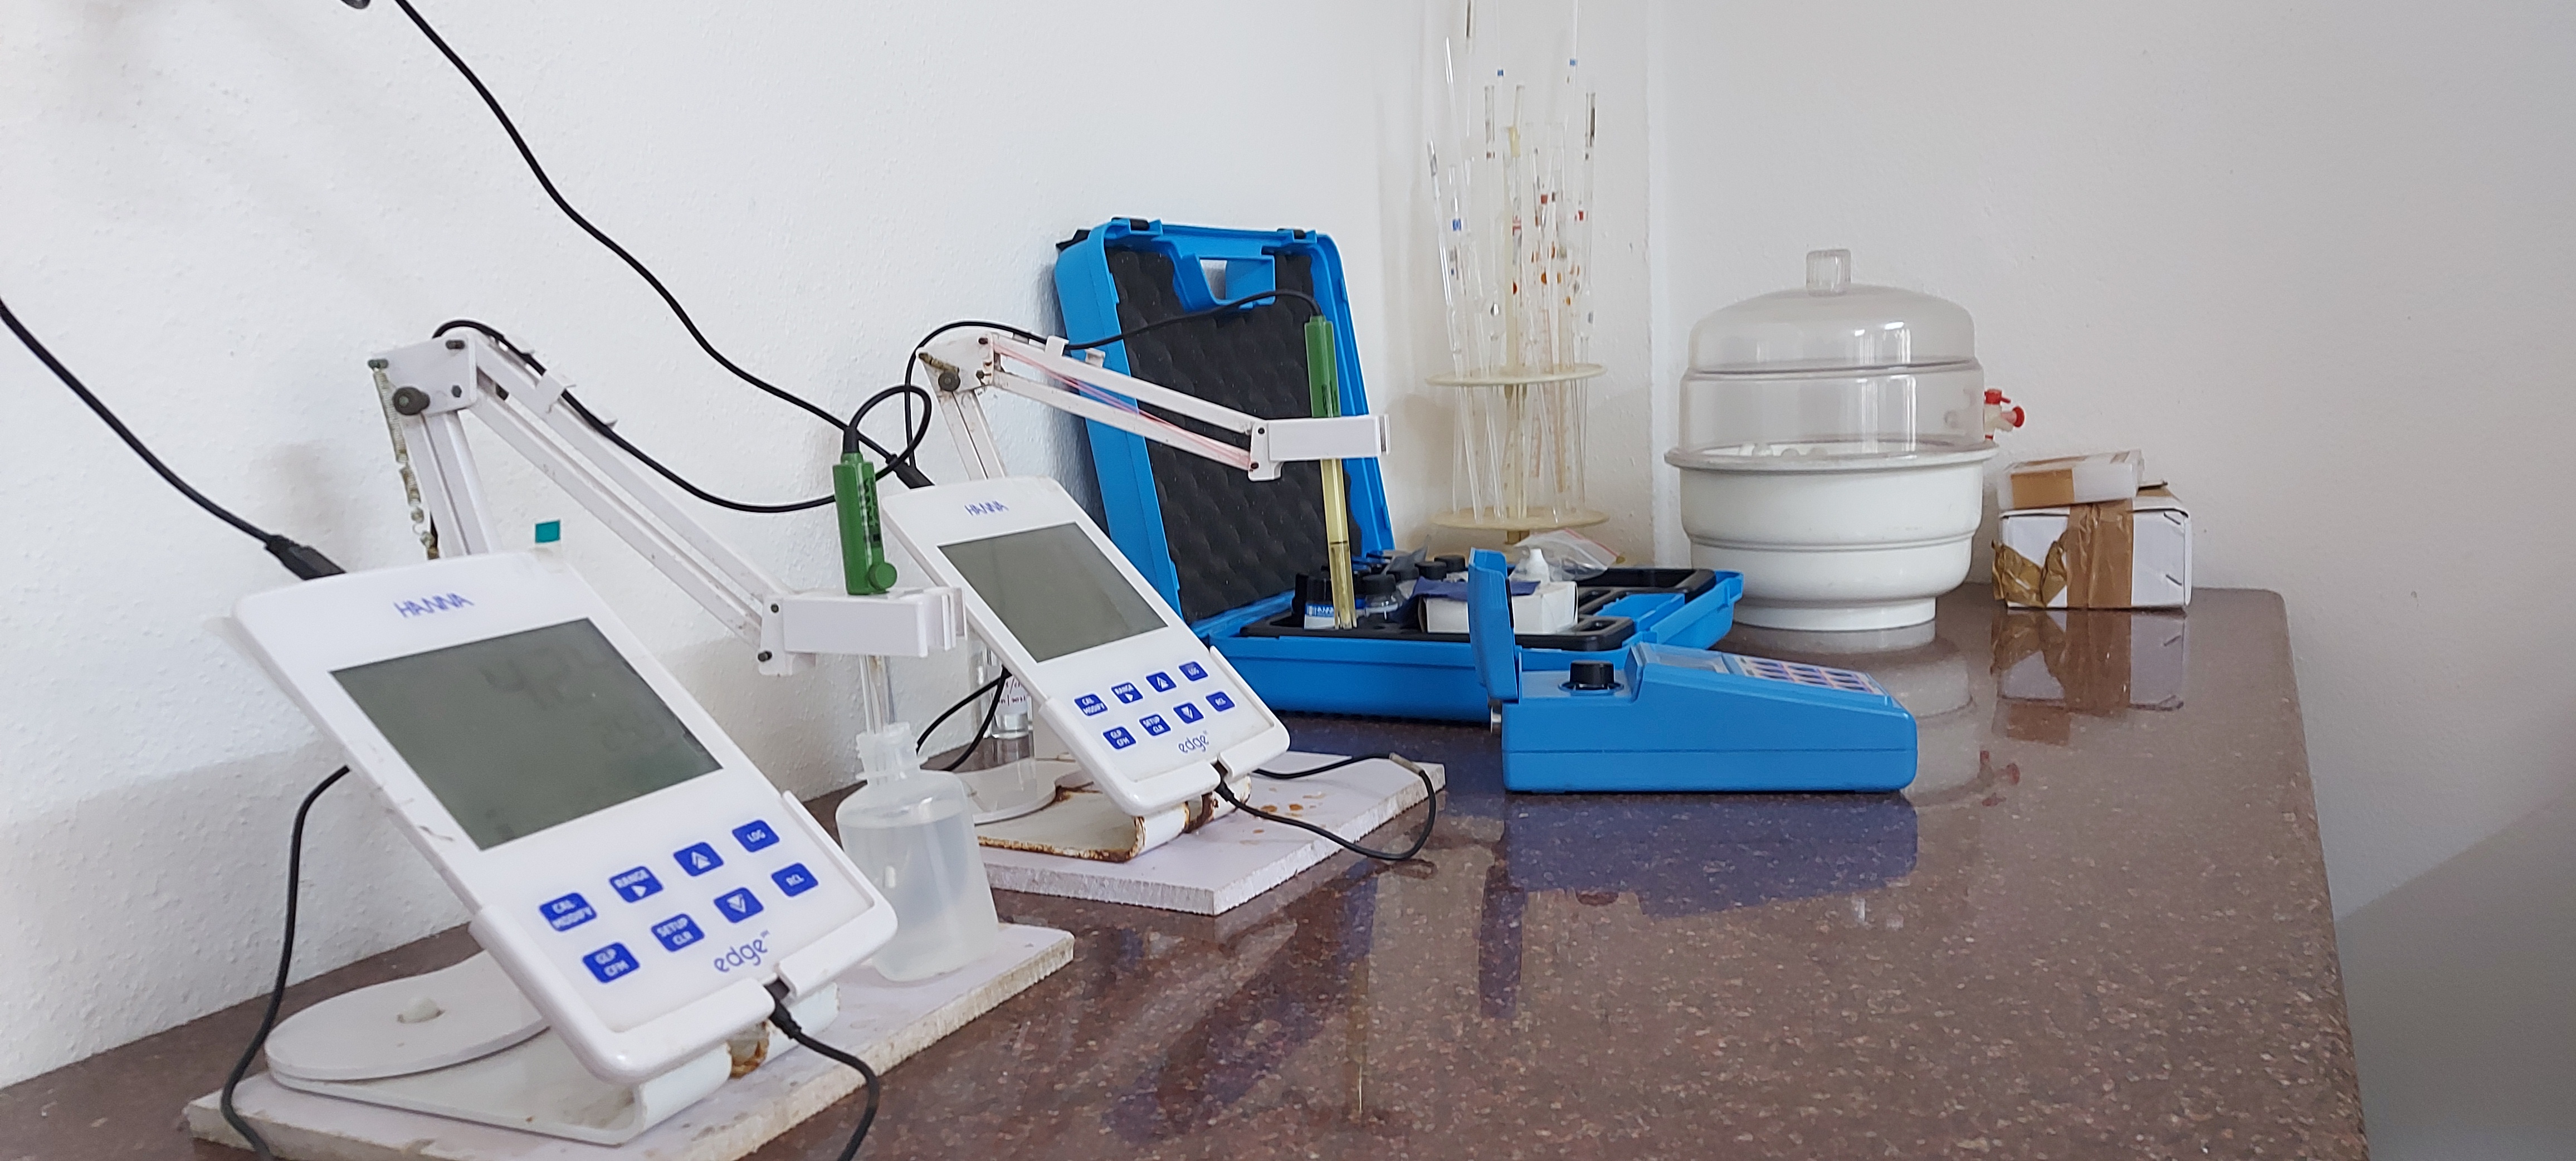 Photo of chemlab physical measurements station